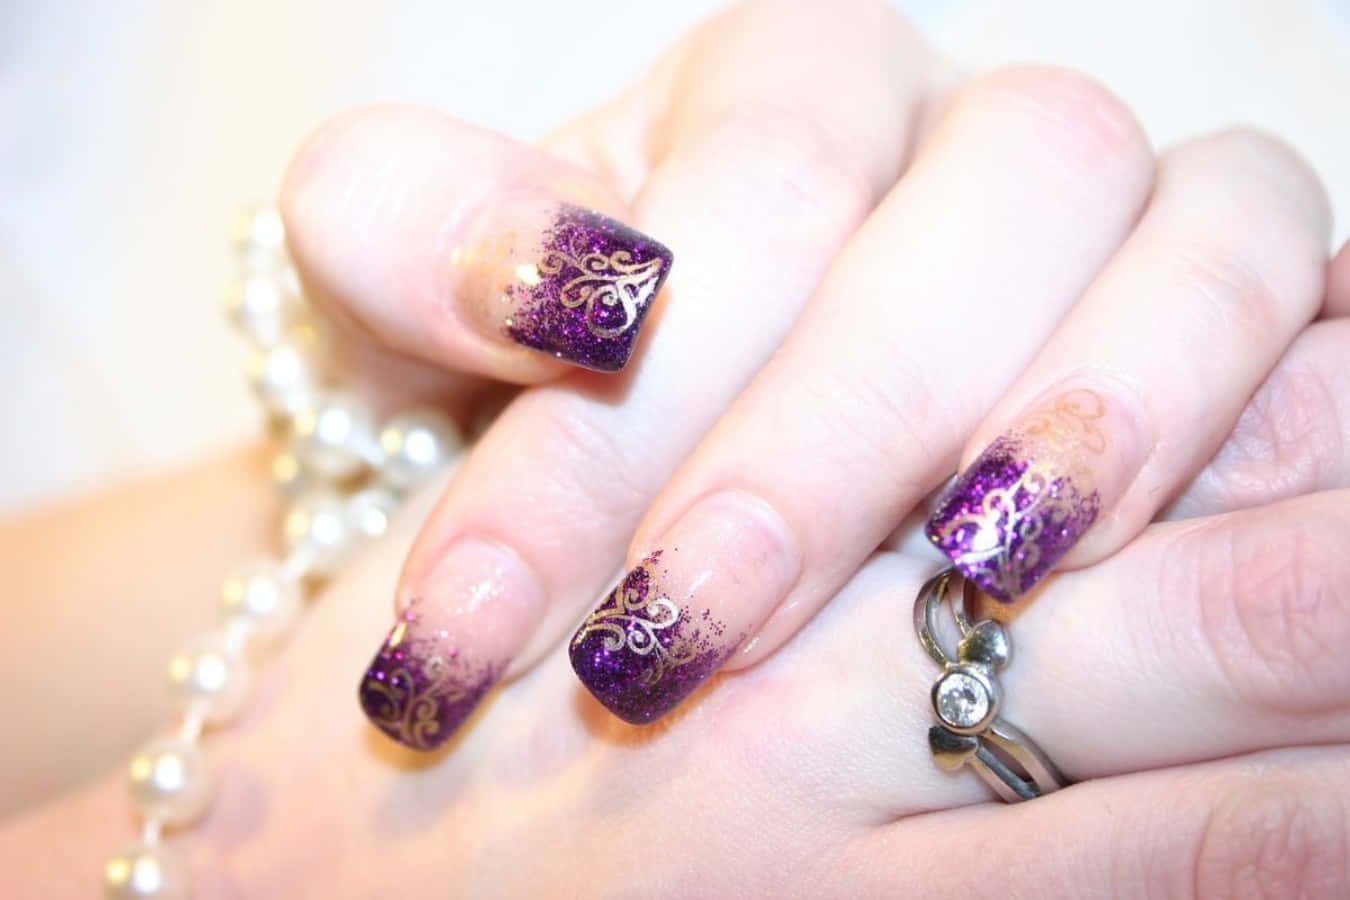 How To Look Gorgeous: 24 Ideas Of Elegant Nails For Real Ladies